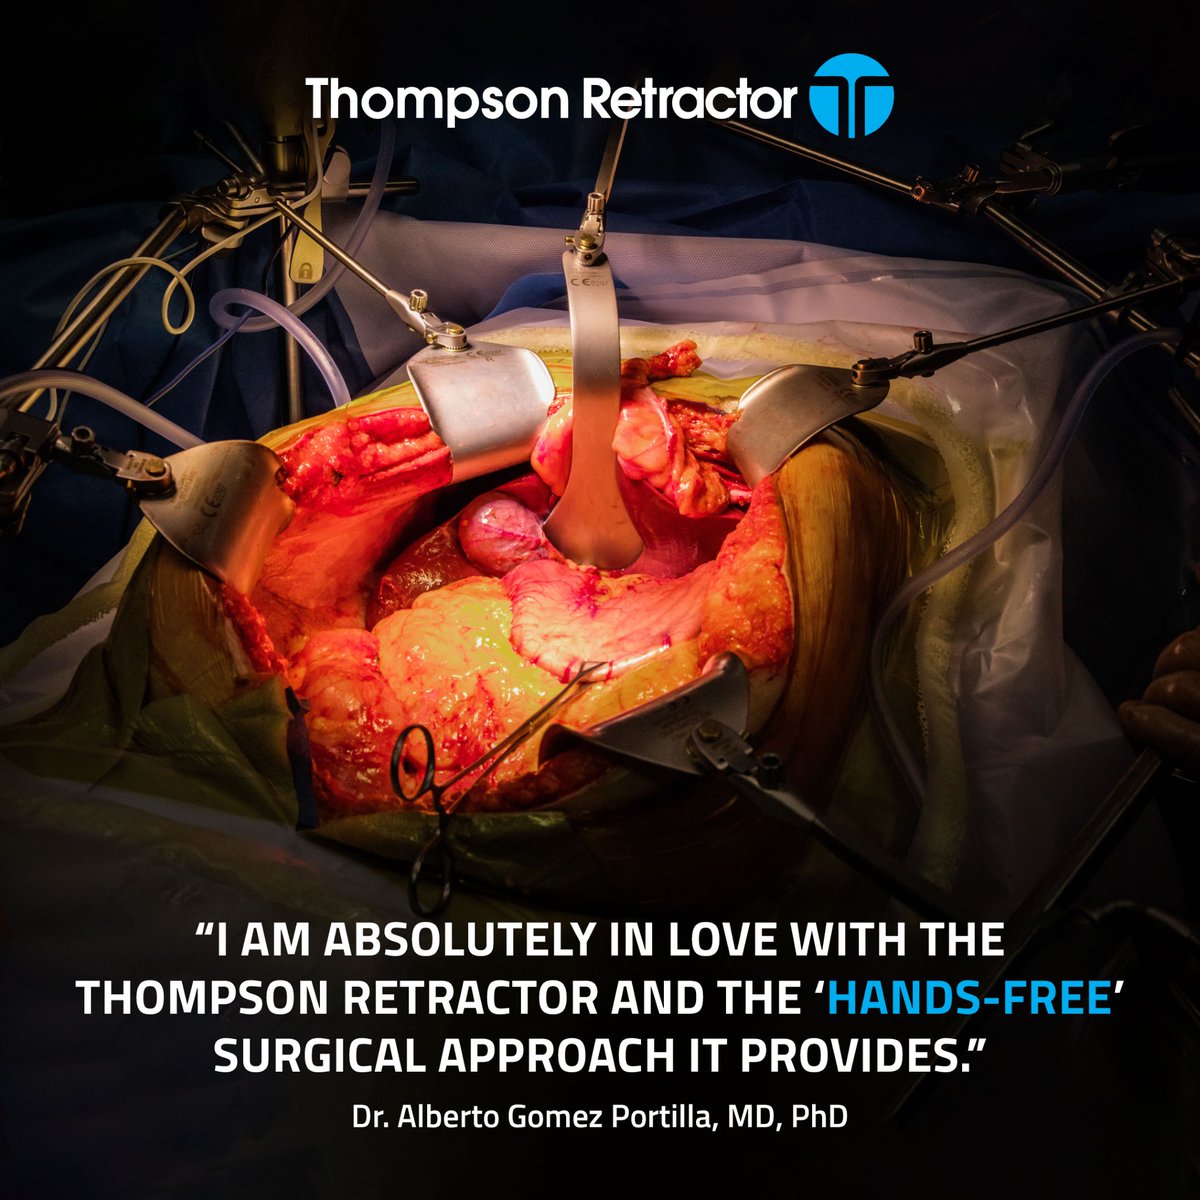 Hear directly from a surgeon on why they choose Thompson. 'I am absolutely in love with the Thompson Retractor and the 'hands-free' surgical approach it provides.' - Dr. Alberto Gomez Portilla, MD, PhD. Thanks Dr.!
#liversurgery #surgeontestimony #thompsonretractor #livertwitter